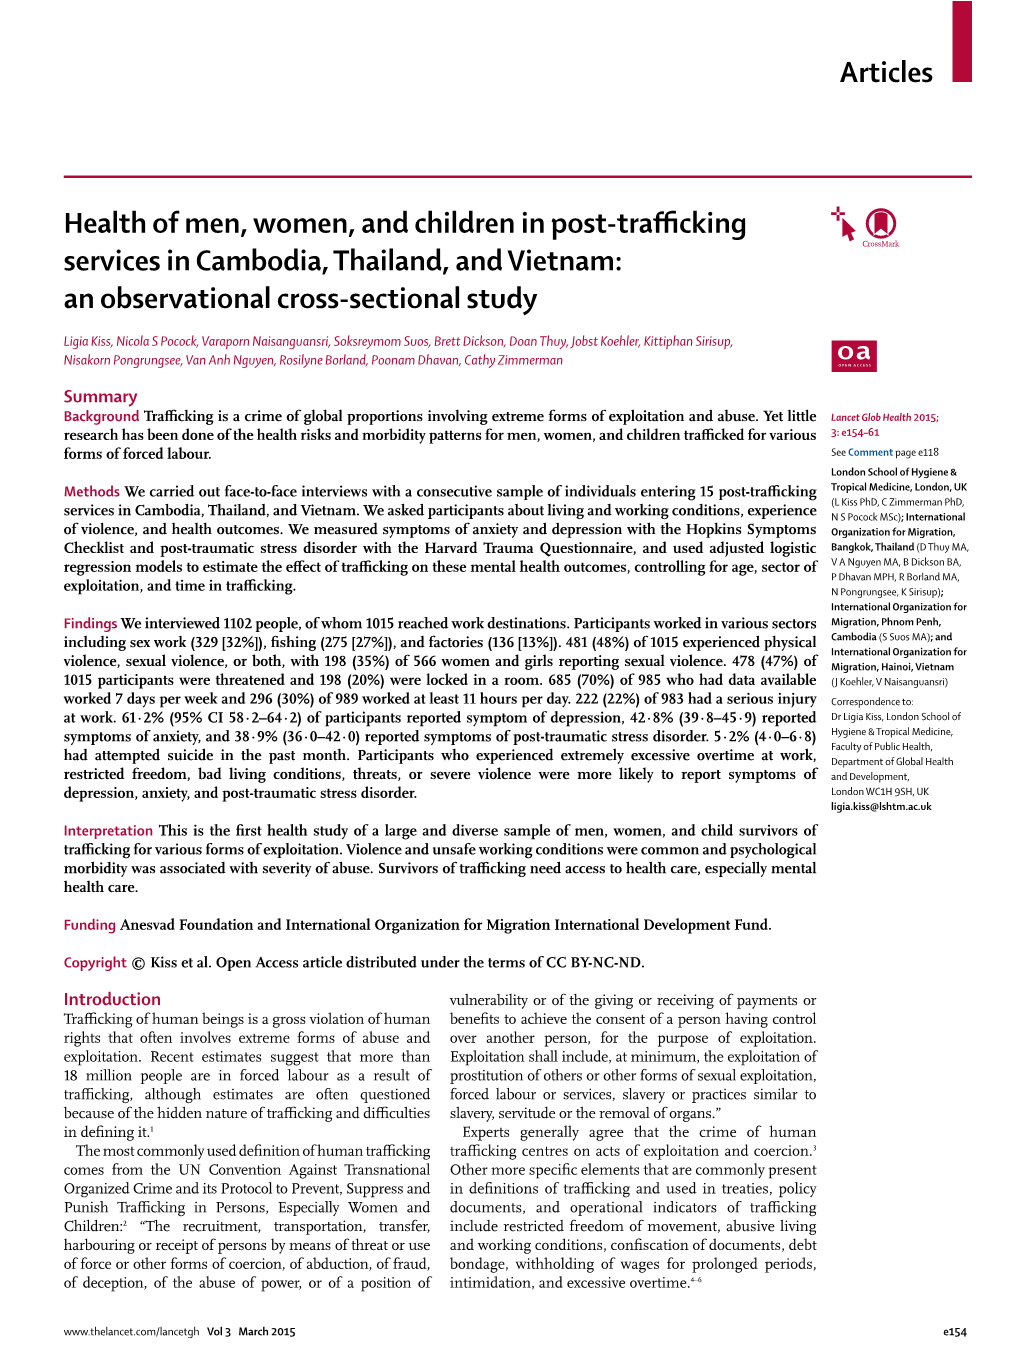 Health of Men, Women, and Children in Post-Traffi Cking Services In